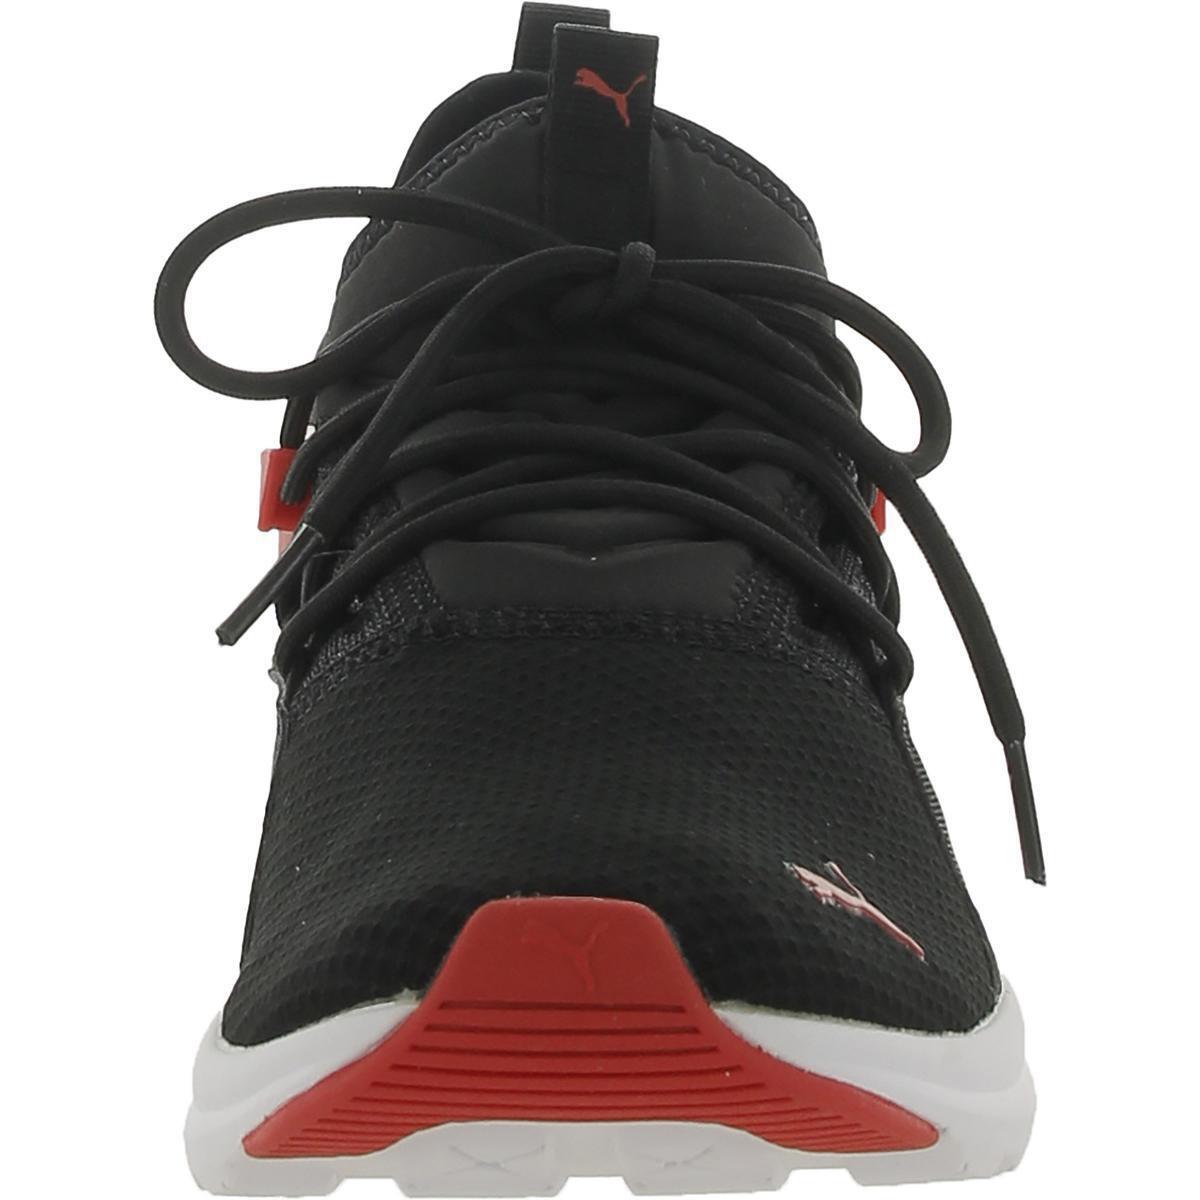 Puma Mens Electron 2.0 Gym Fitness Trainer Running Shoes Sneakers Bhfo 8352 - Black/Red/White